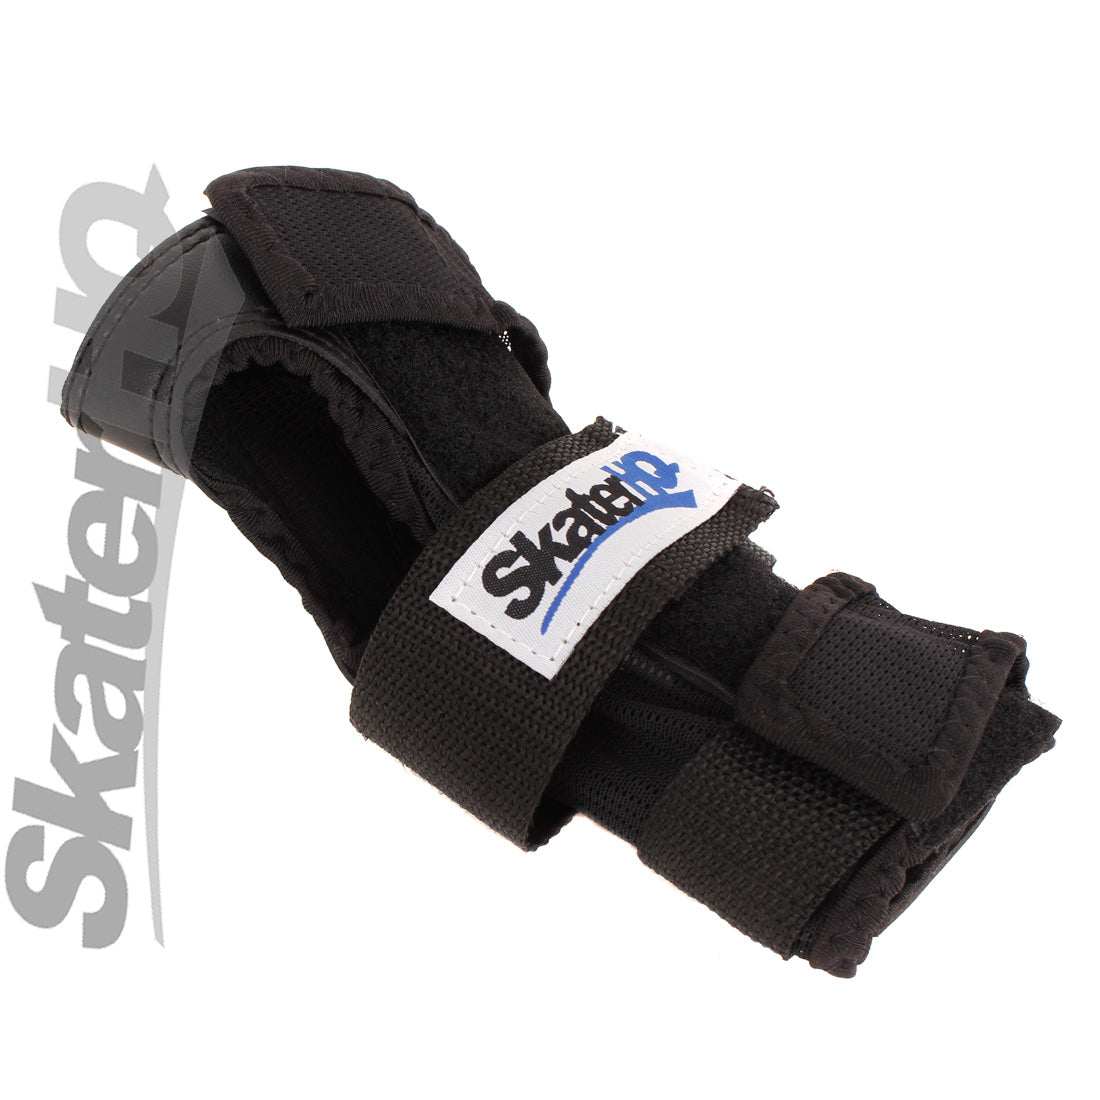 Skater HQ Wrist Guard - Large Protective Gear